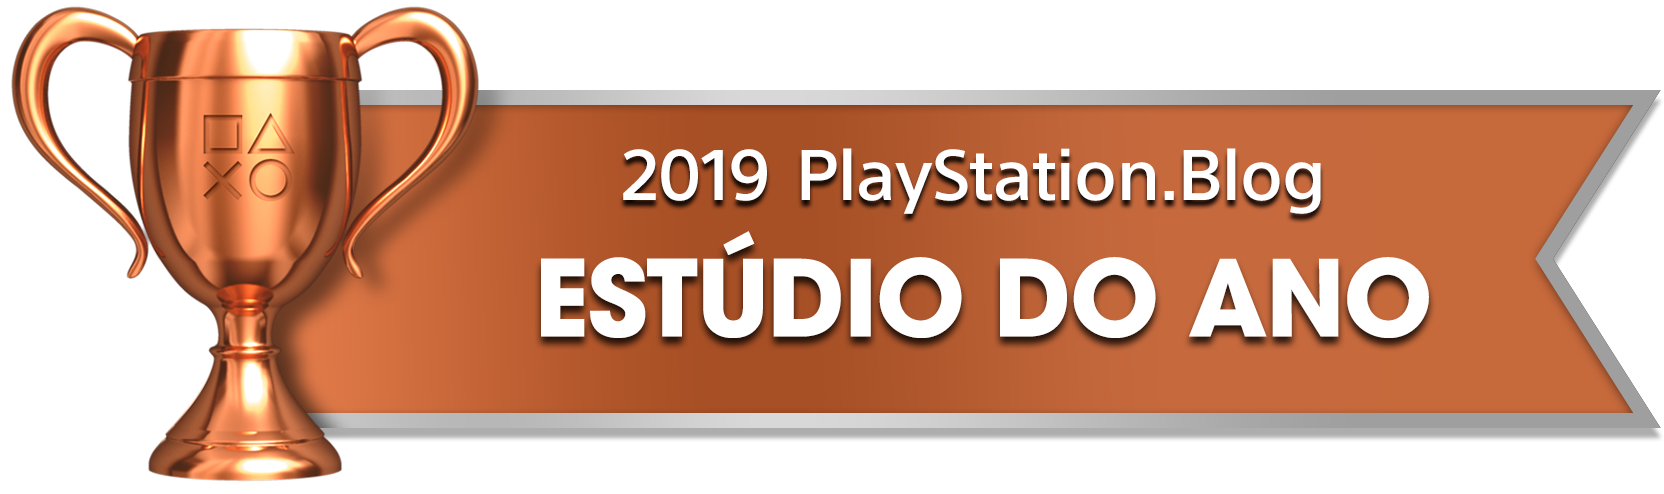 PS Blog Game of the Year 2019 - Studio of the Year - 4 - Bronze